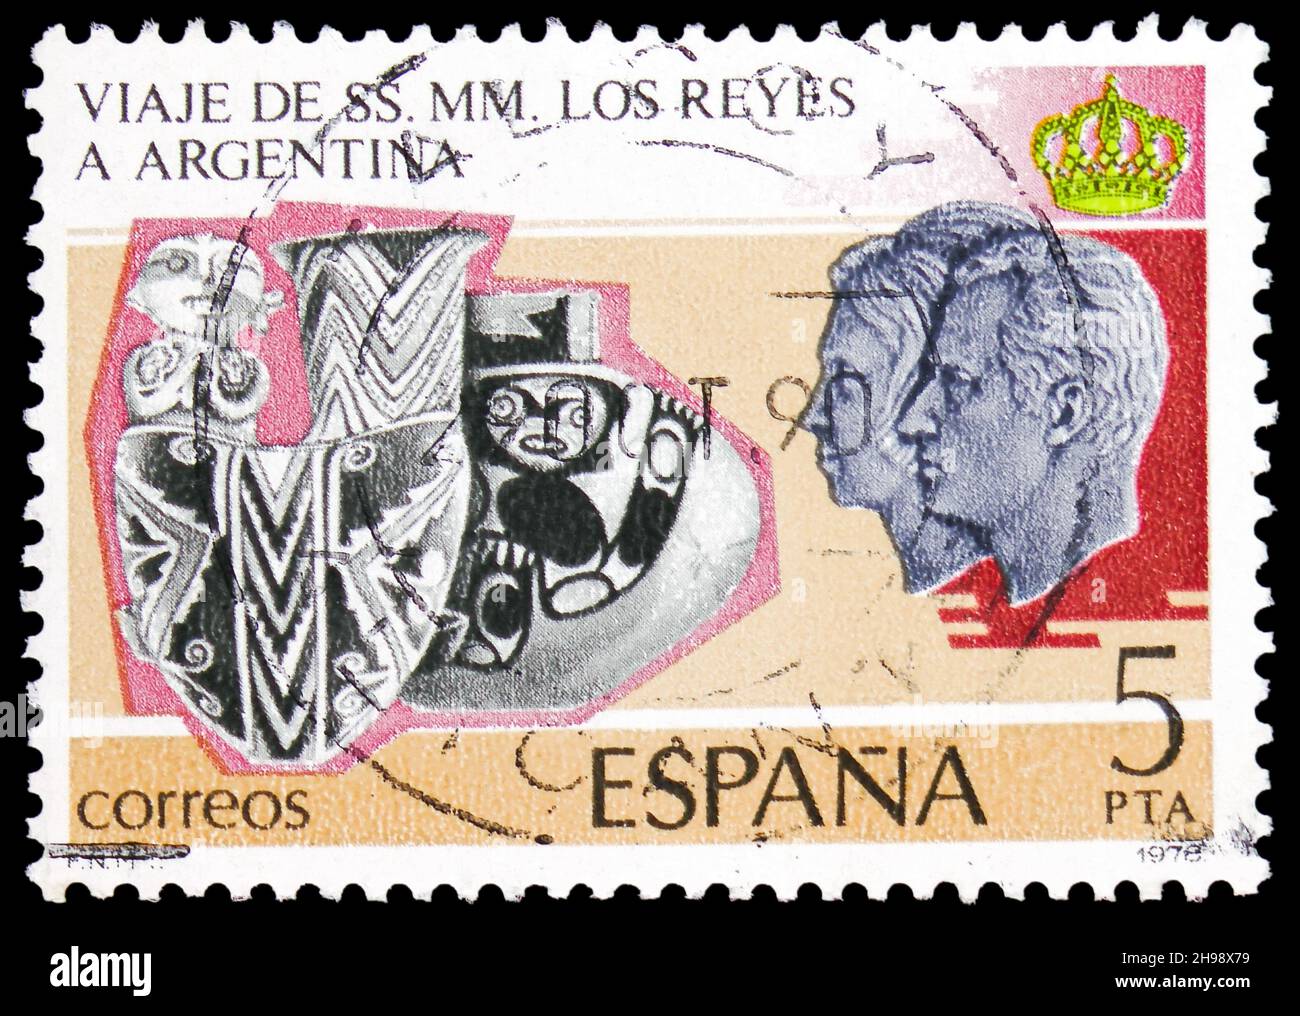 MOSCOW, RUSSIA - NOVEMBER 7, 2021: Postage stamp printed in Spain shows Royal Visit to Argentina, Trip of The Kings to Hispanoamerica serie, circa 197 Stock Photo